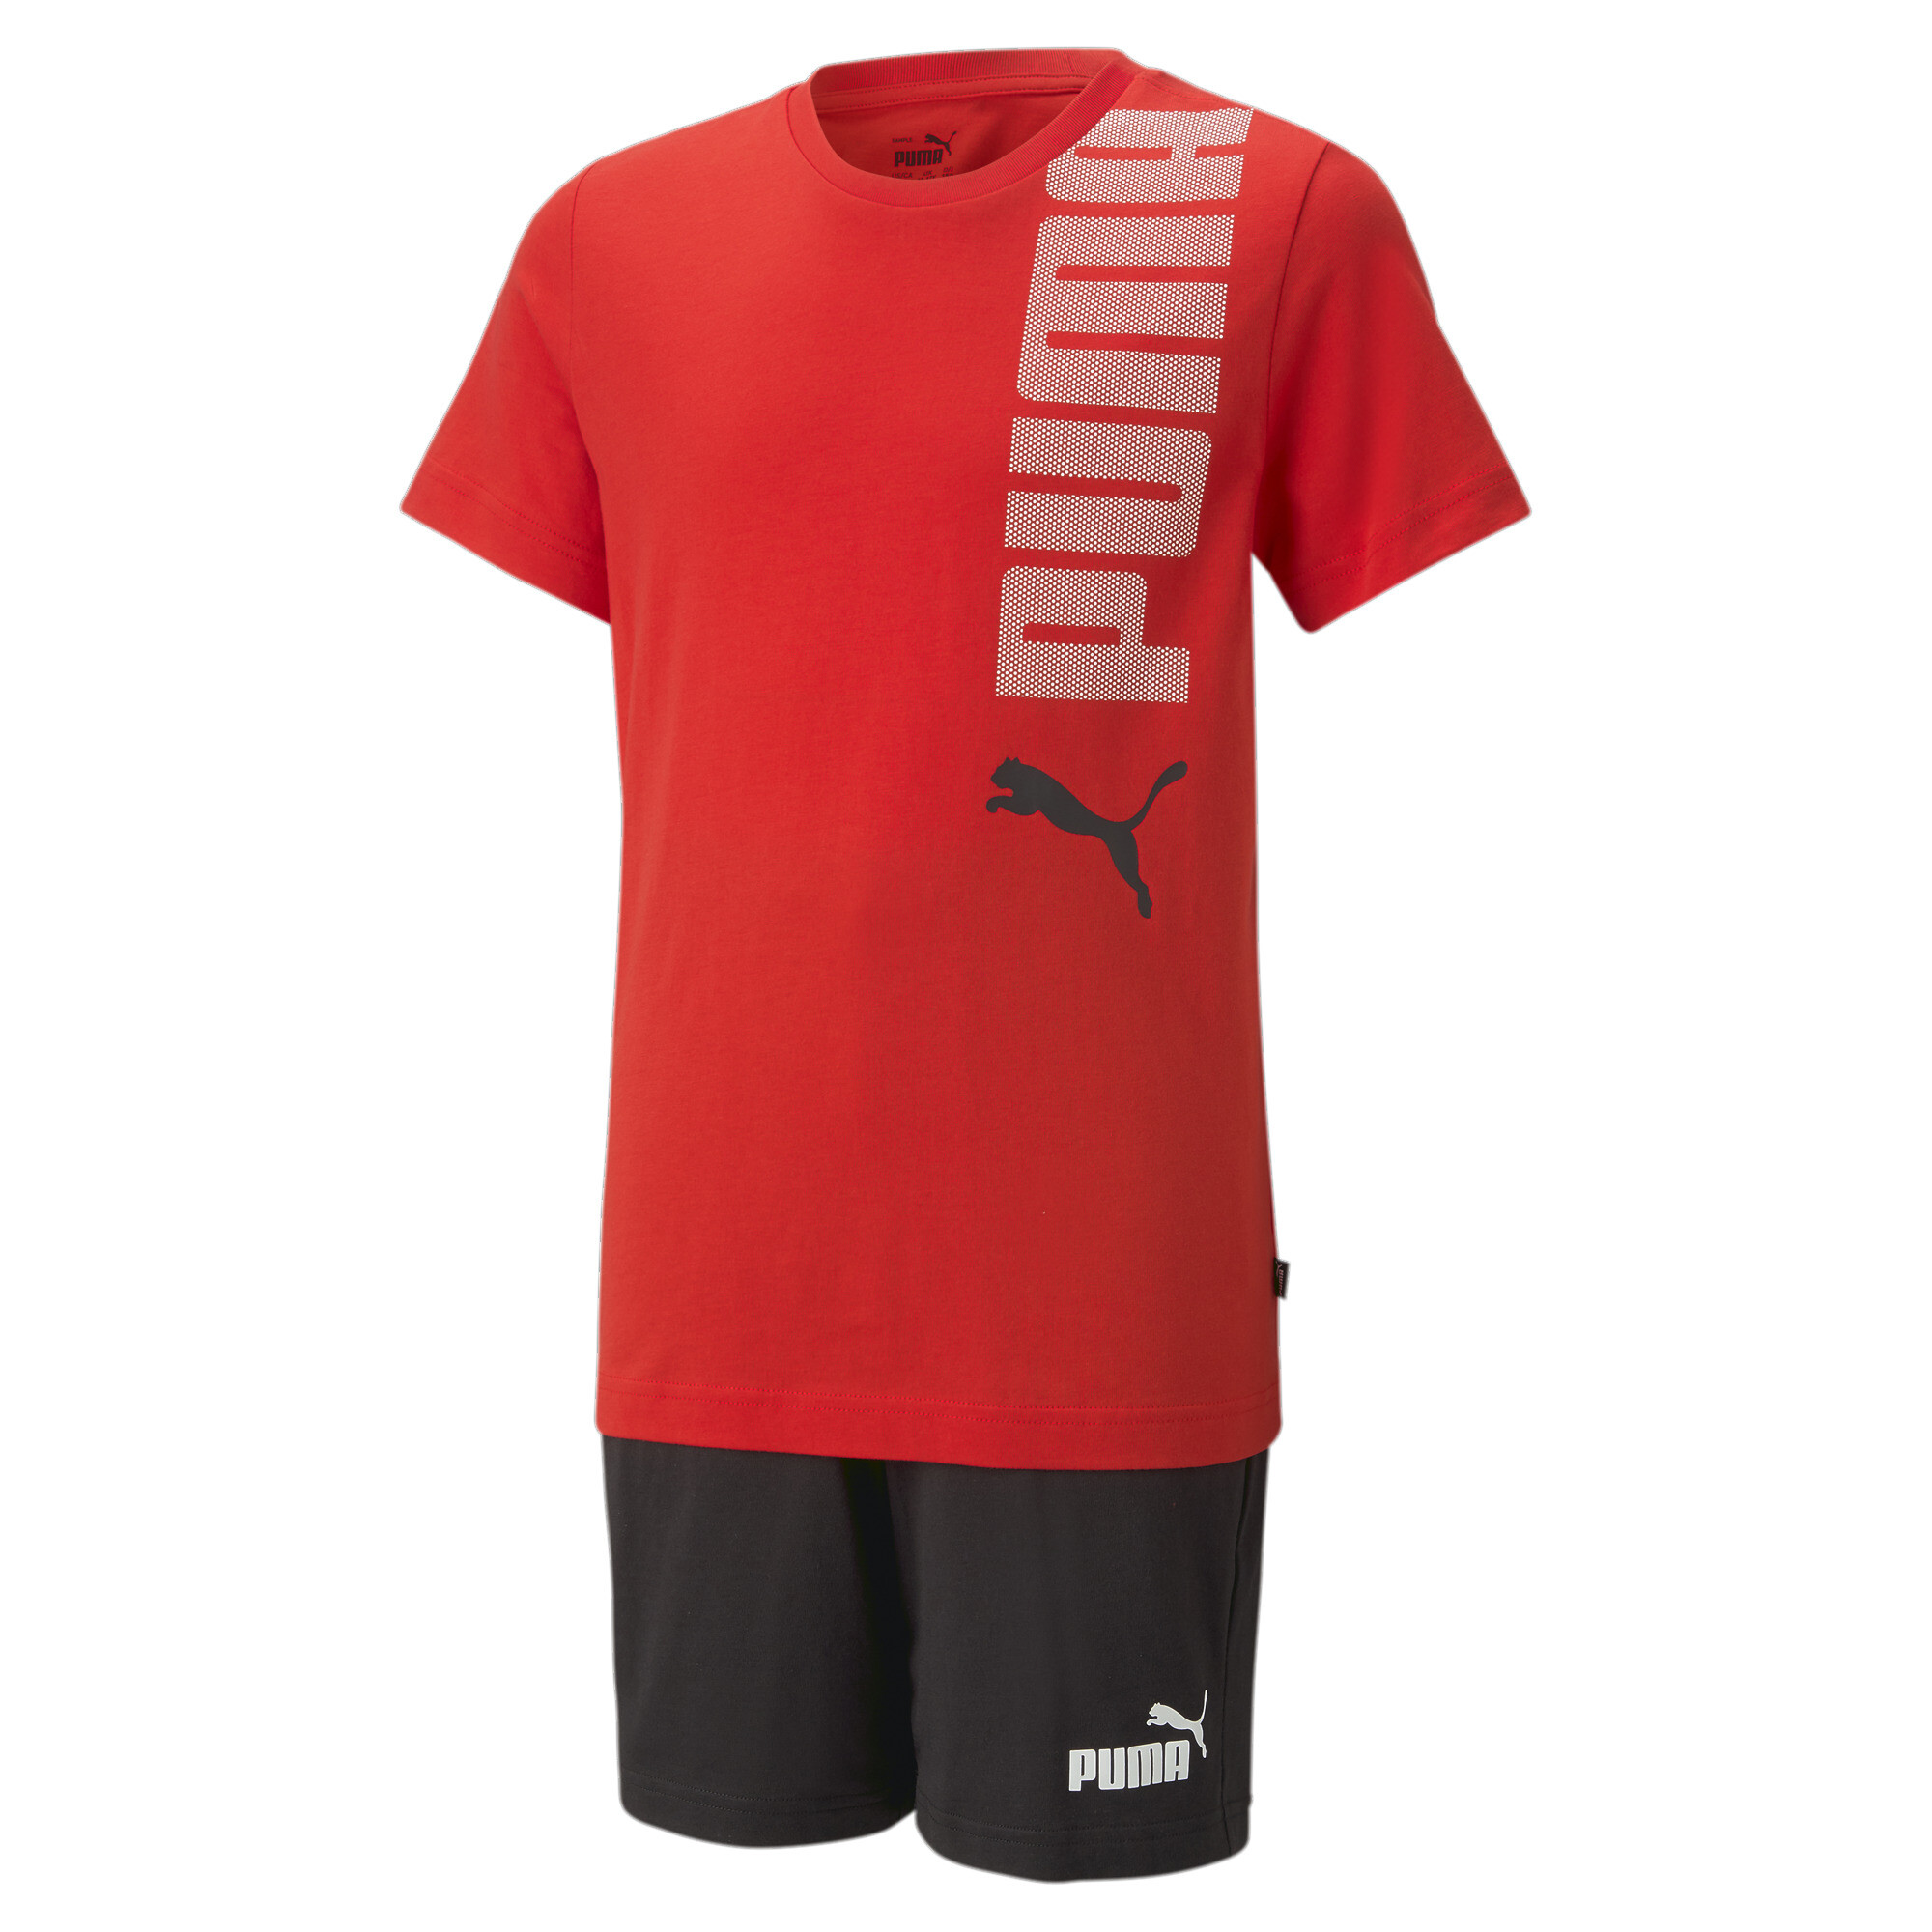 30%OFF！ プーマ キッズ ボーイズ ロゴ ラボ 上下 2点セット Tシャツ & ショーツ 120-160cm メンズ For All Time Red ｜PUMA.comの大画像